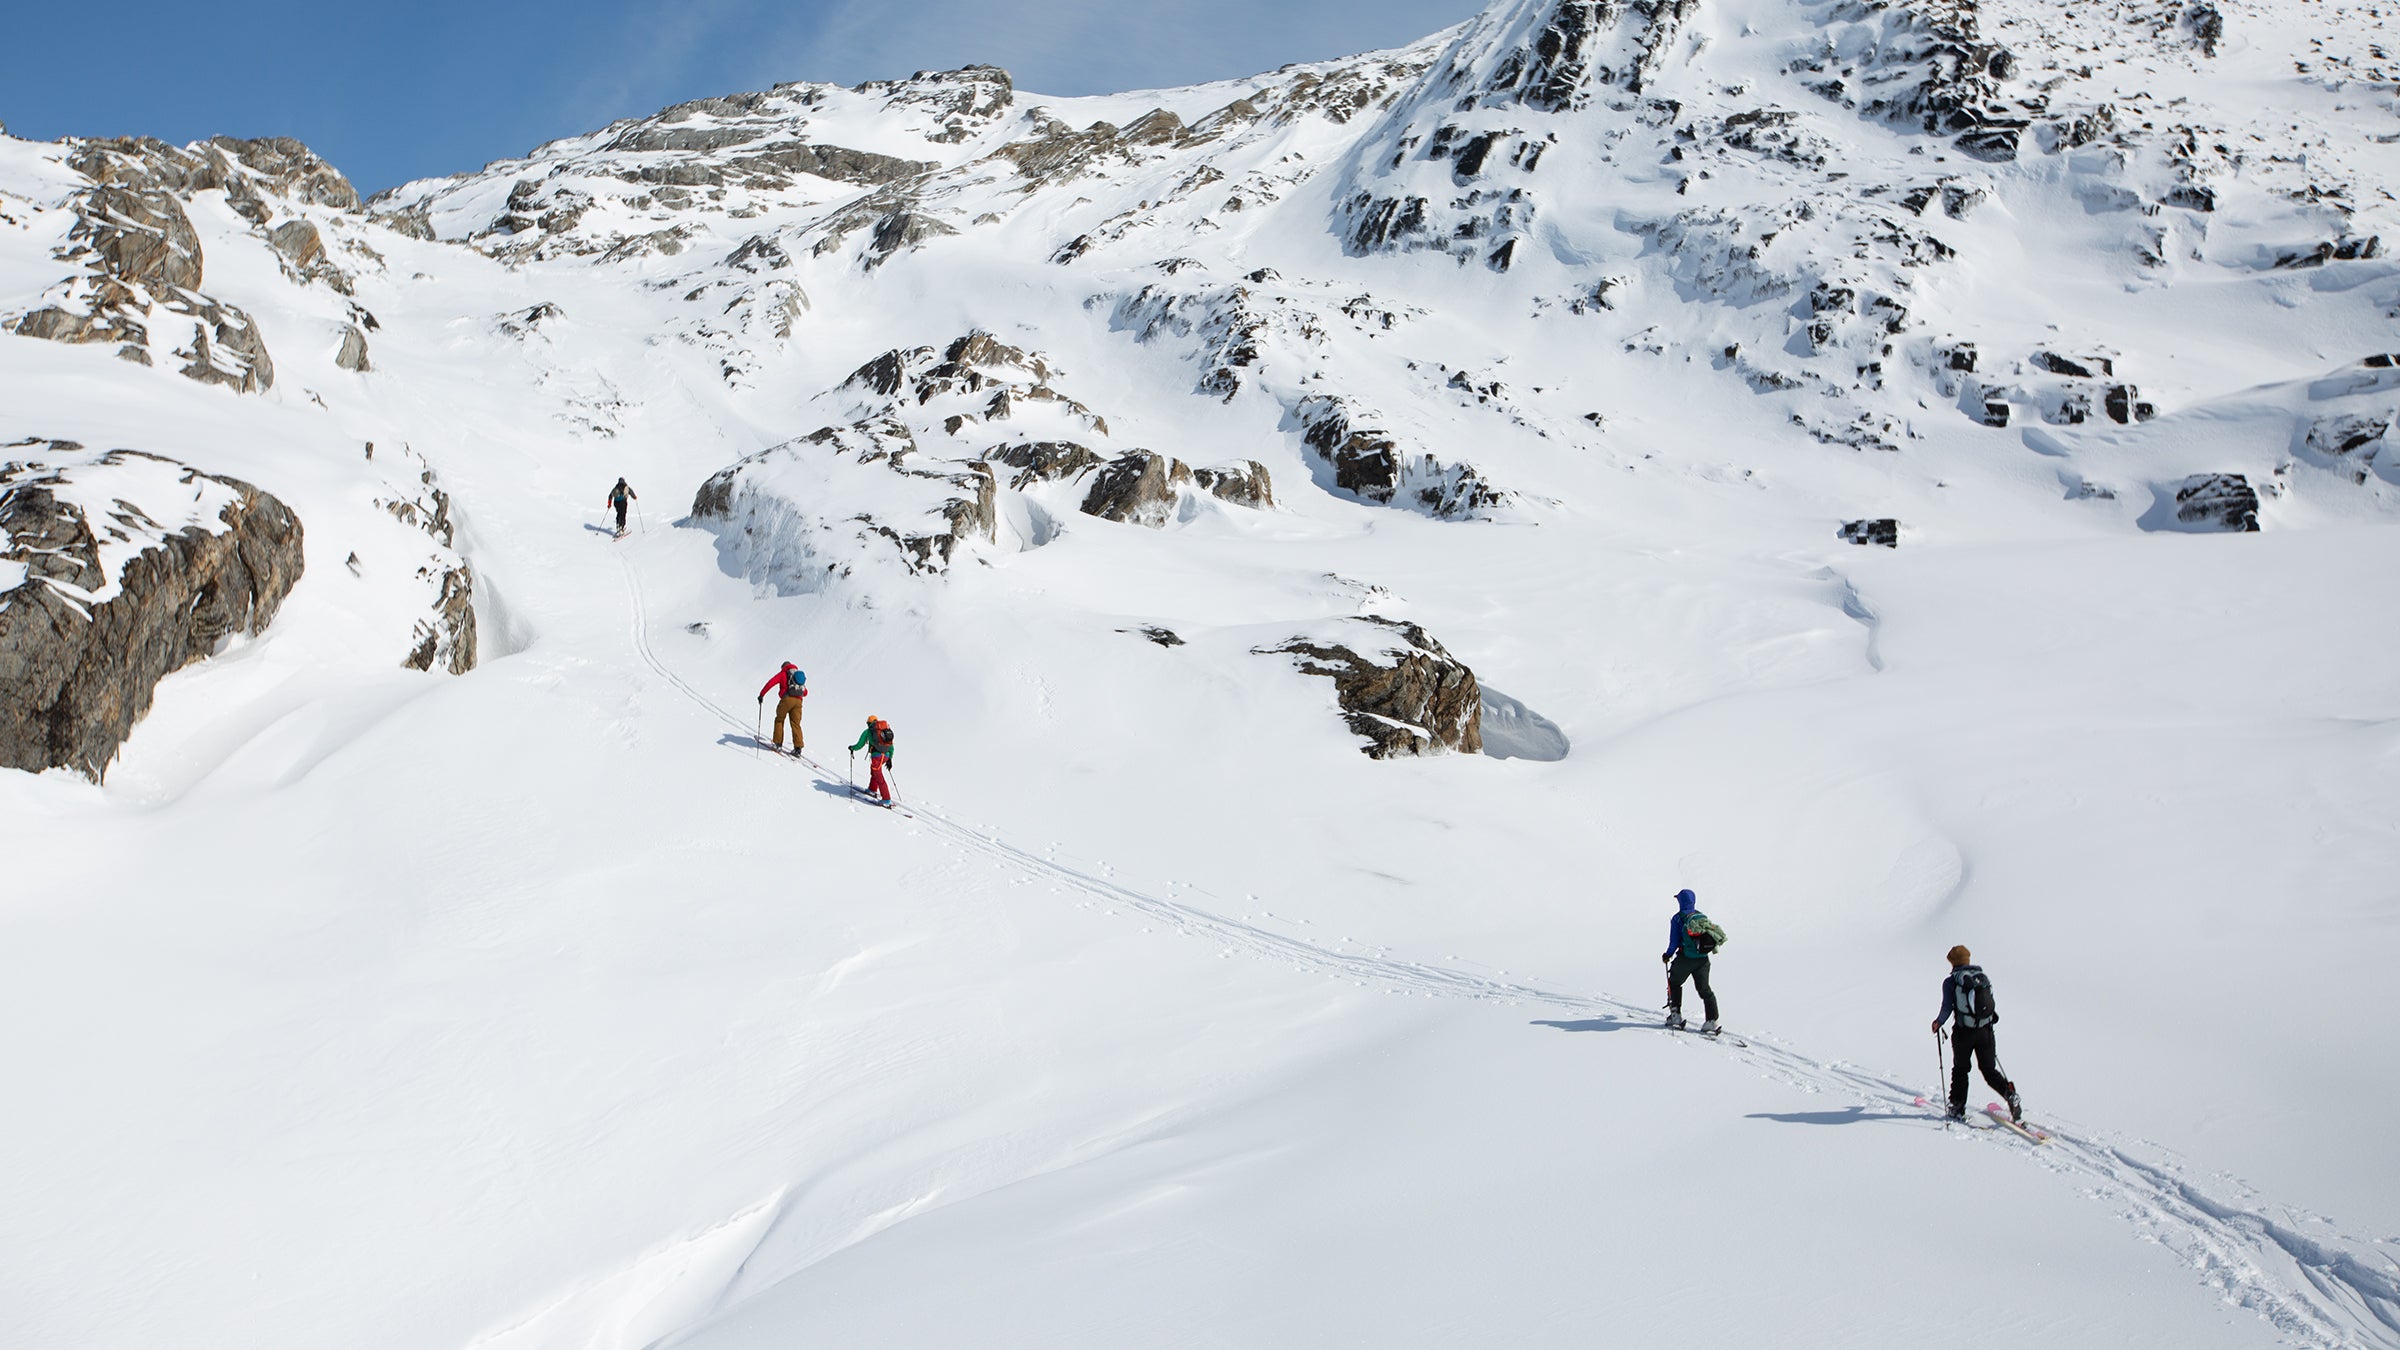 Skin care guide for touring skis & boards